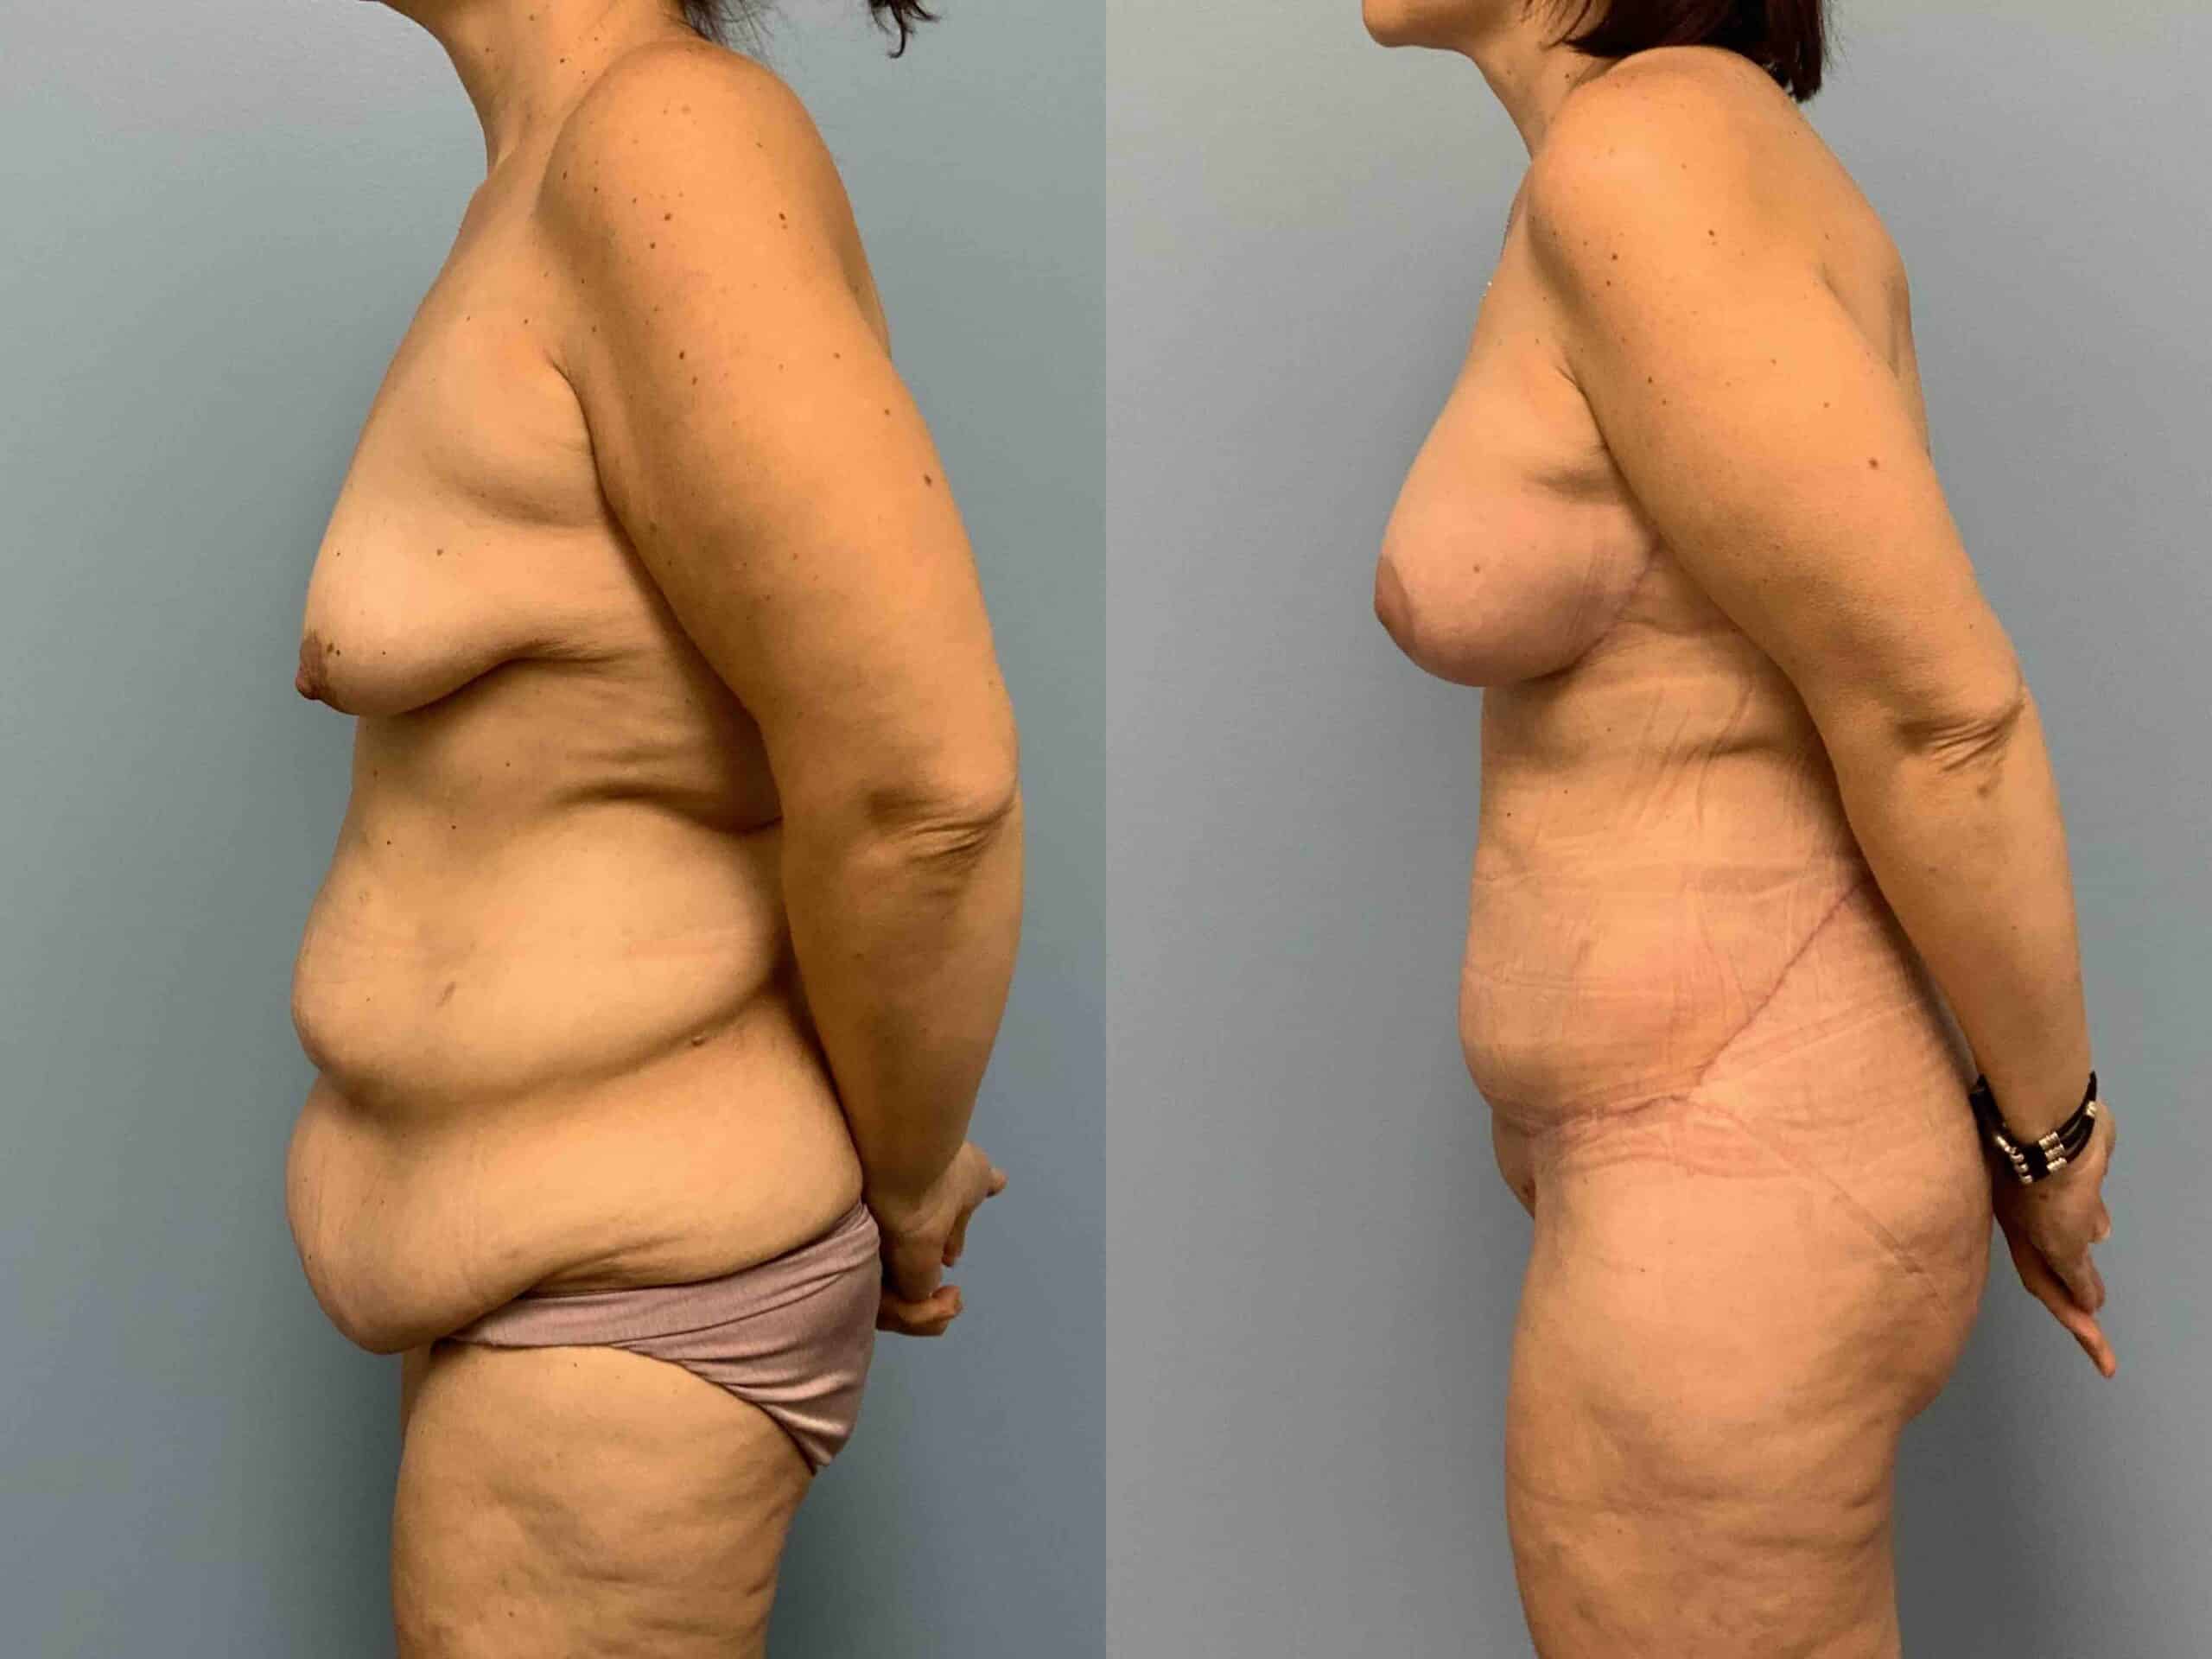 Before and after, 2 mo post op from Tummy Tuck, Belt Lipectomy, VASER Abdomen, Mons, Flanks Axilla, Axillary Roll Resection Breast Lift/Mastopexy, Breast Augmentation performed by Dr. Paul Vanek (side view)